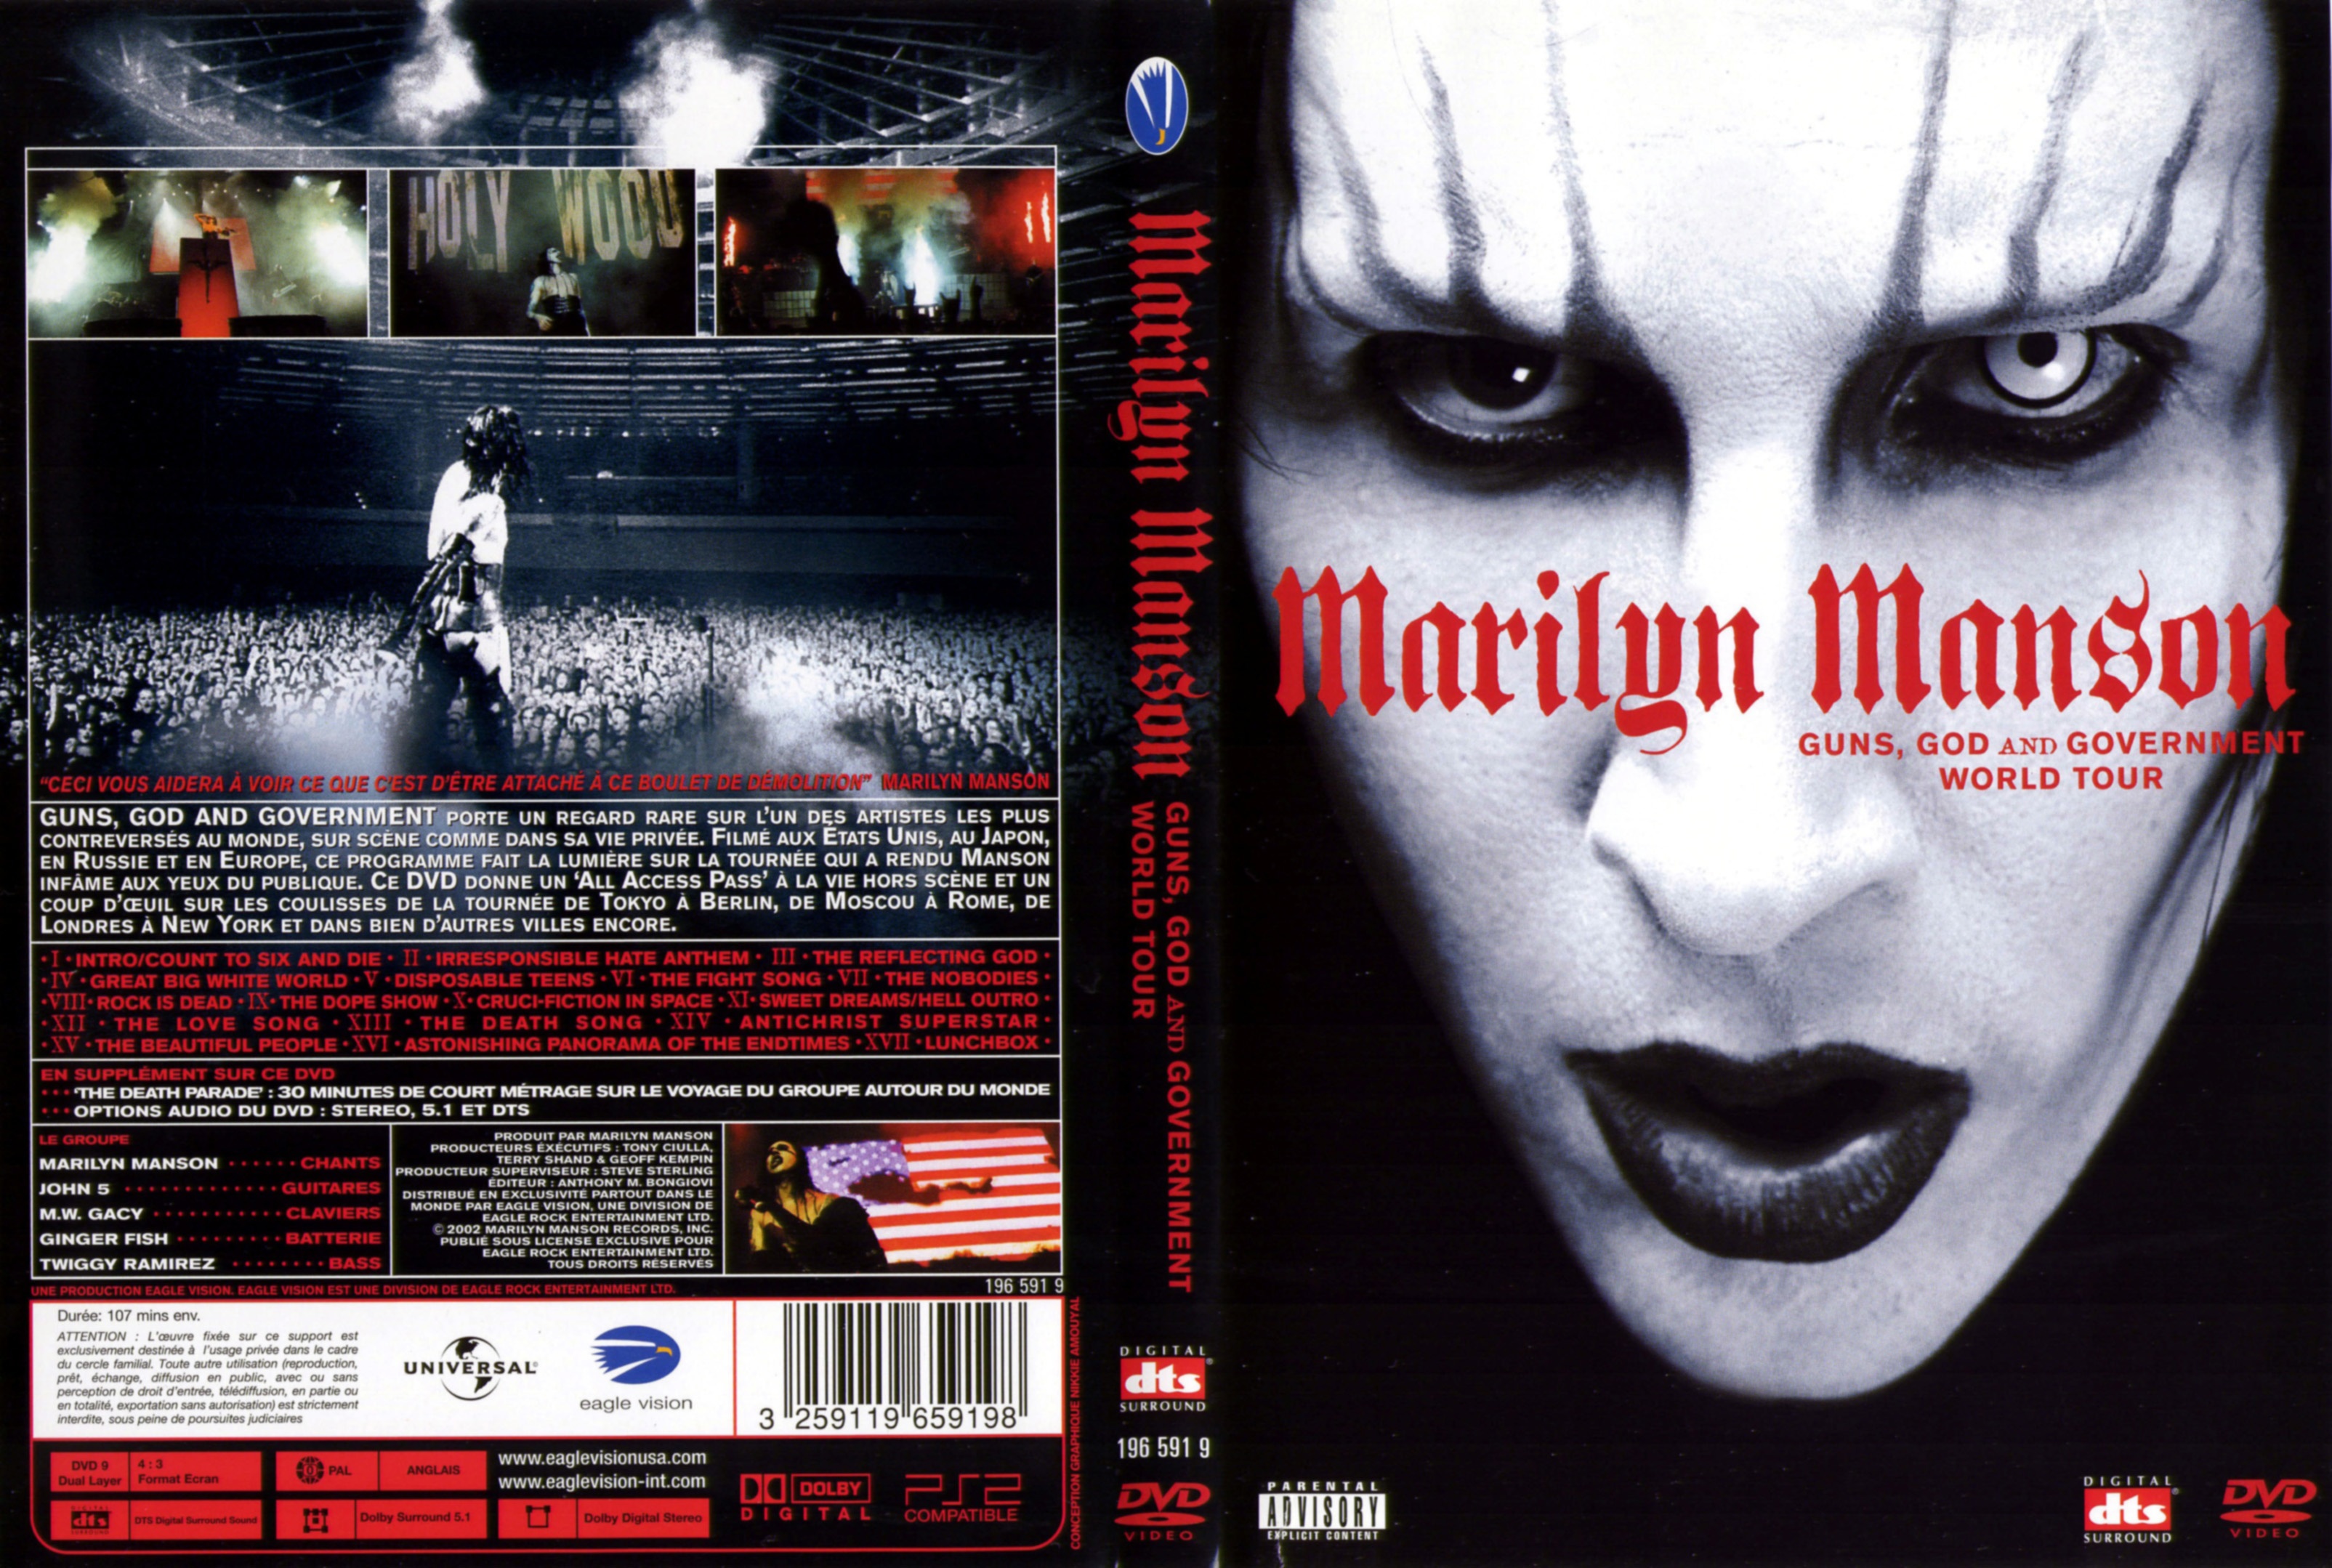 Jaquette DVD Marilyn Manson - guns god and government world tour